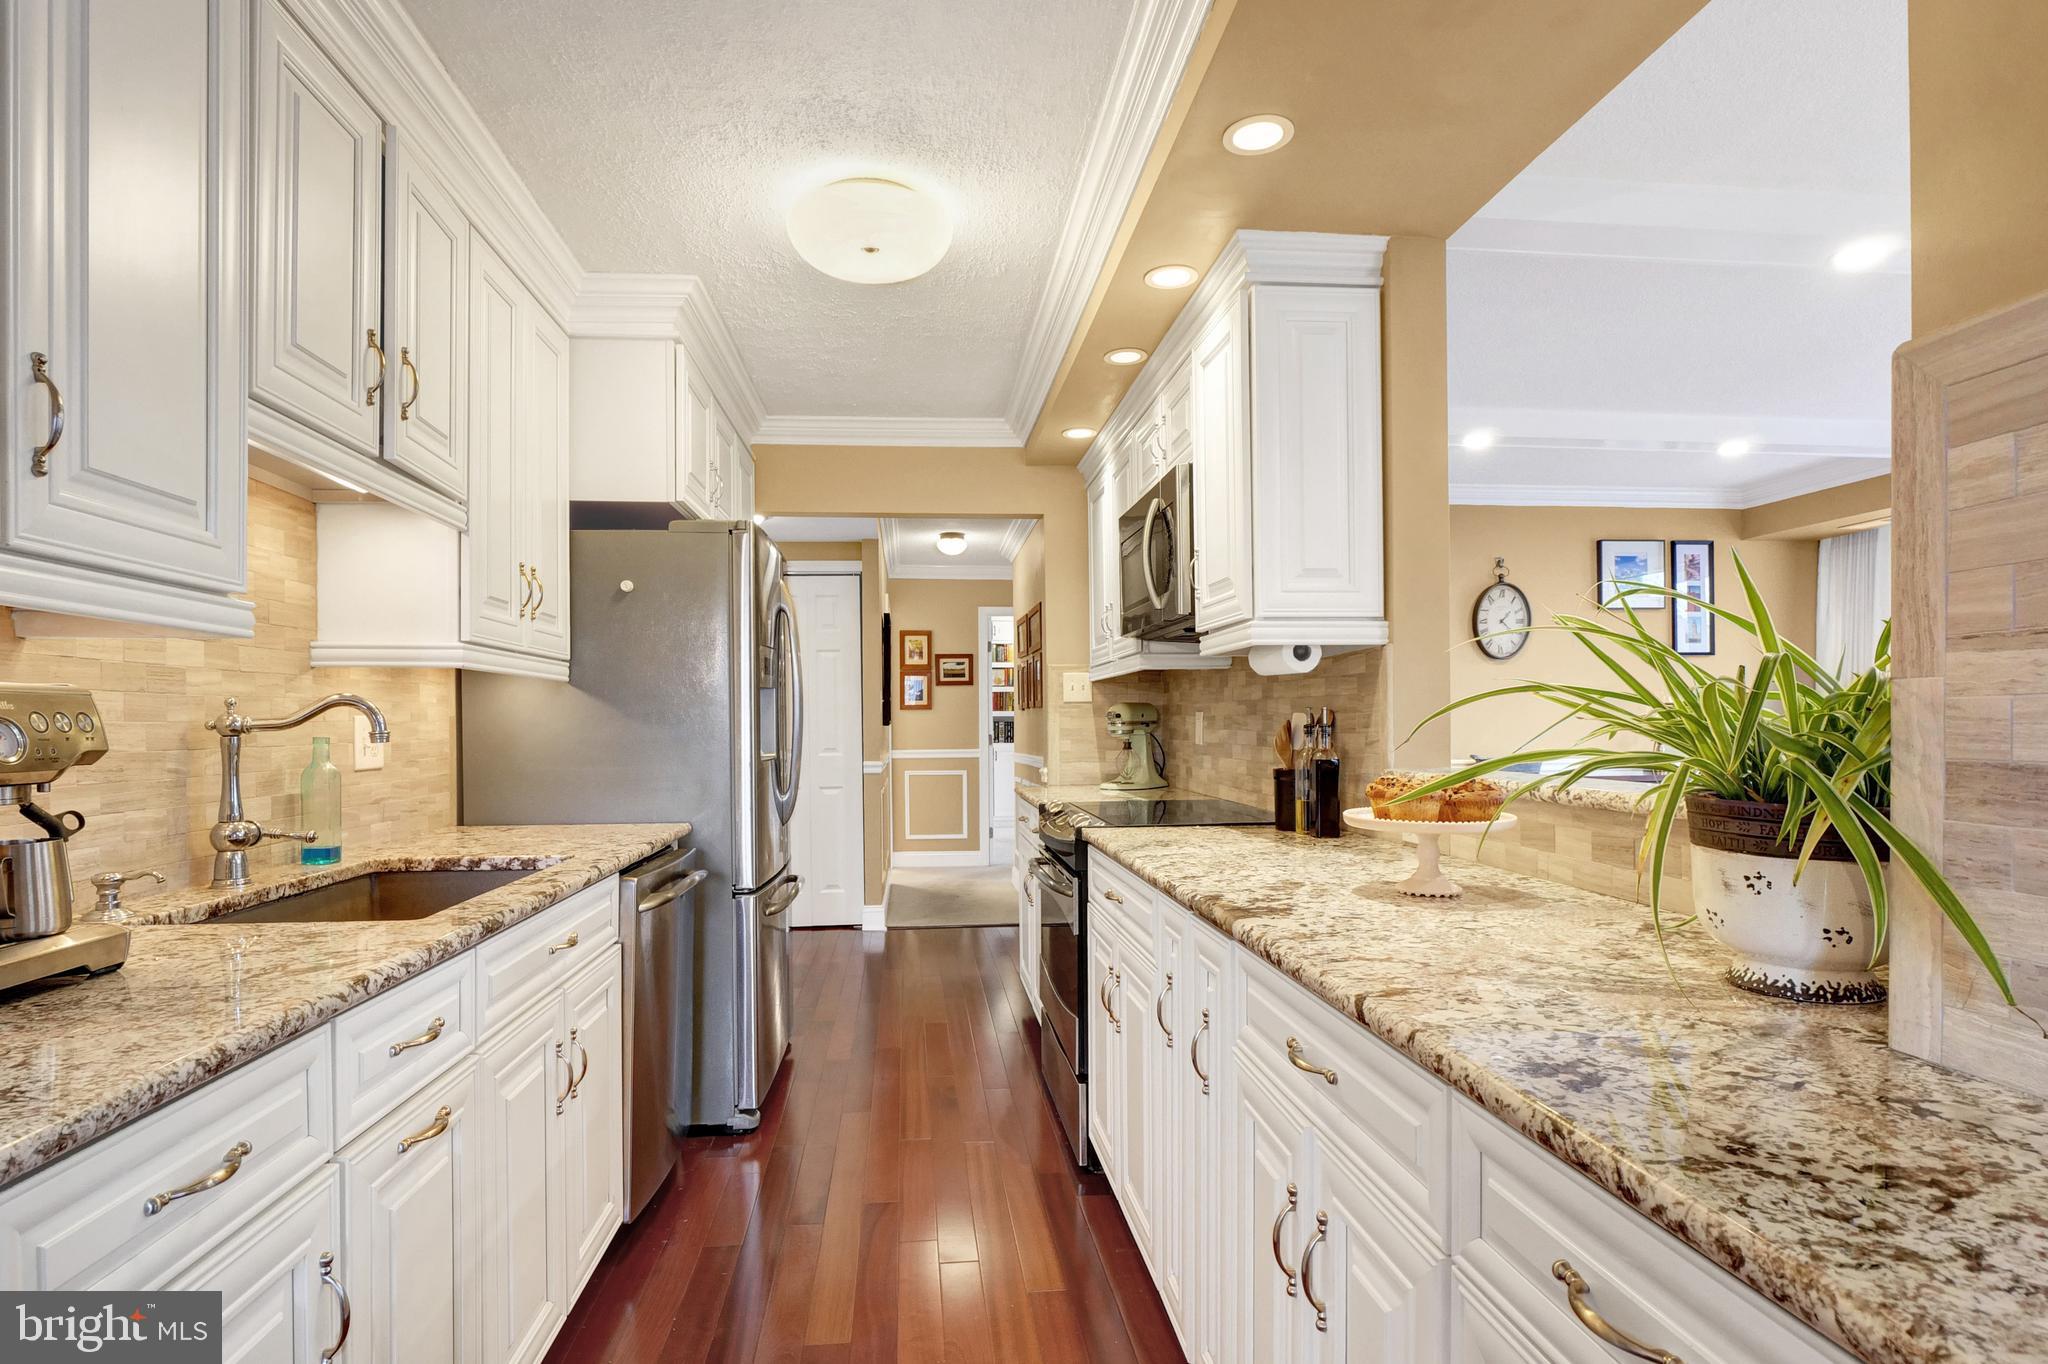 a large kitchen with stainless steel appliances granite countertop a lot of counter space and wooden floor